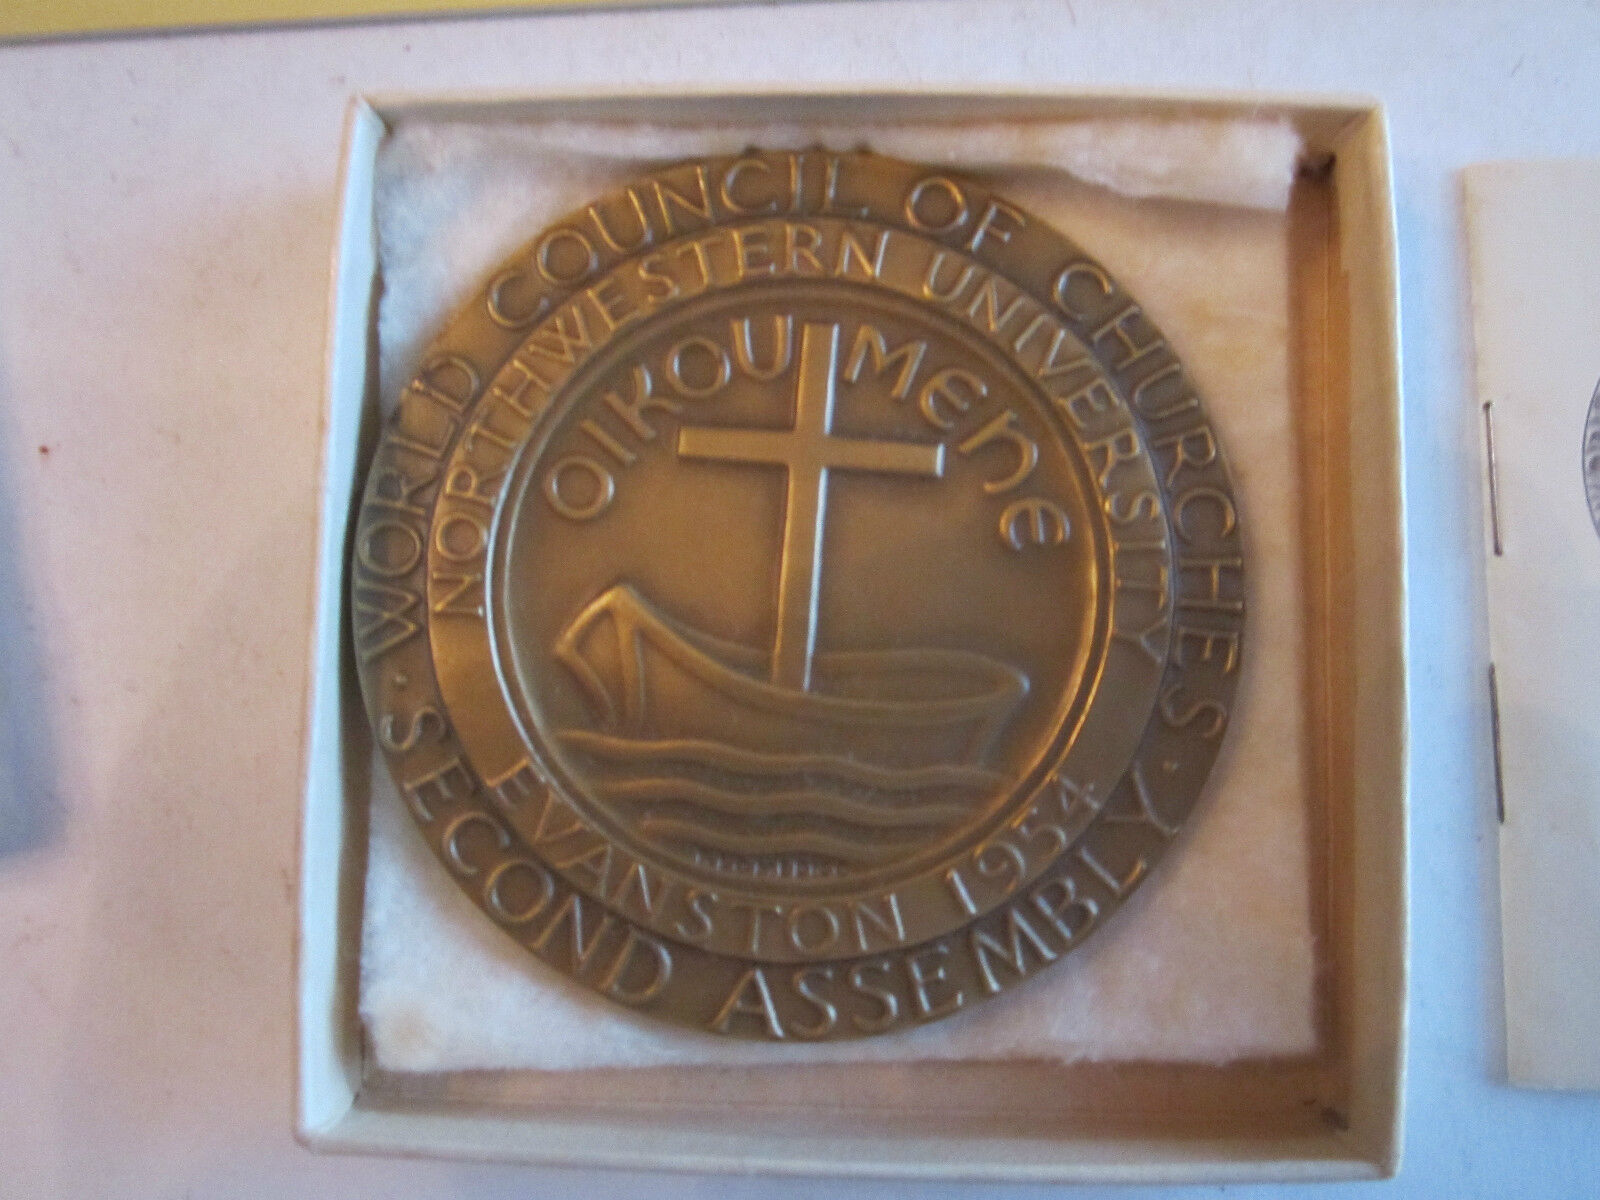 1954 WORLD COUNCIL OF CHURCHES SECOND ASSEMBLY BRONZE MEDALLION IN BOX - BBA-4